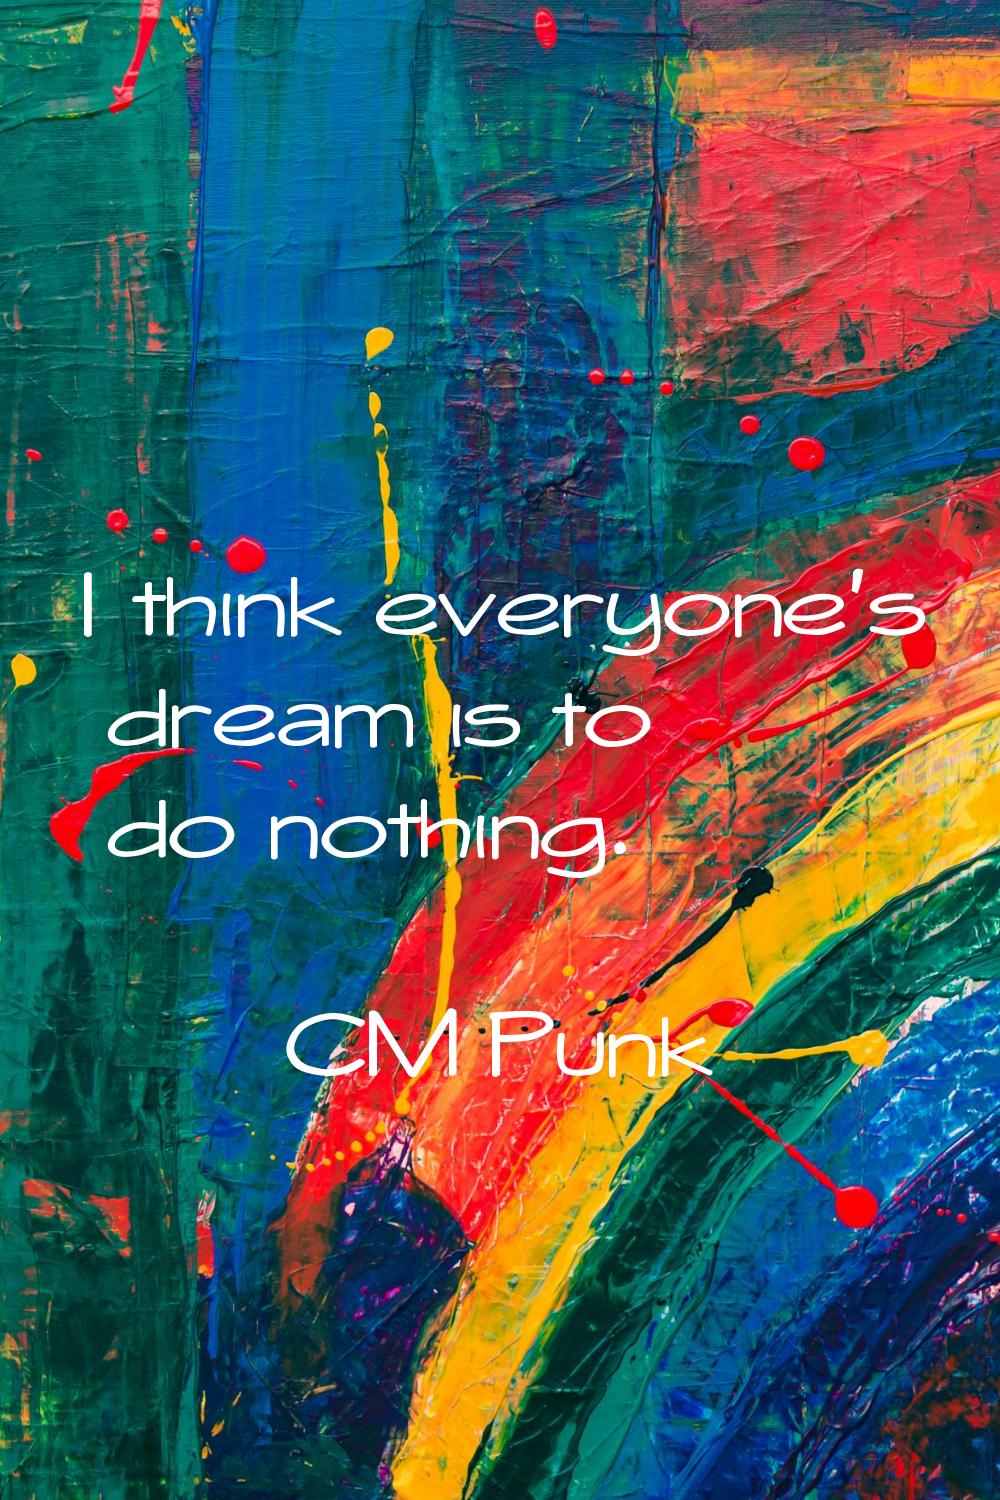 I think everyone's dream is to do nothing.